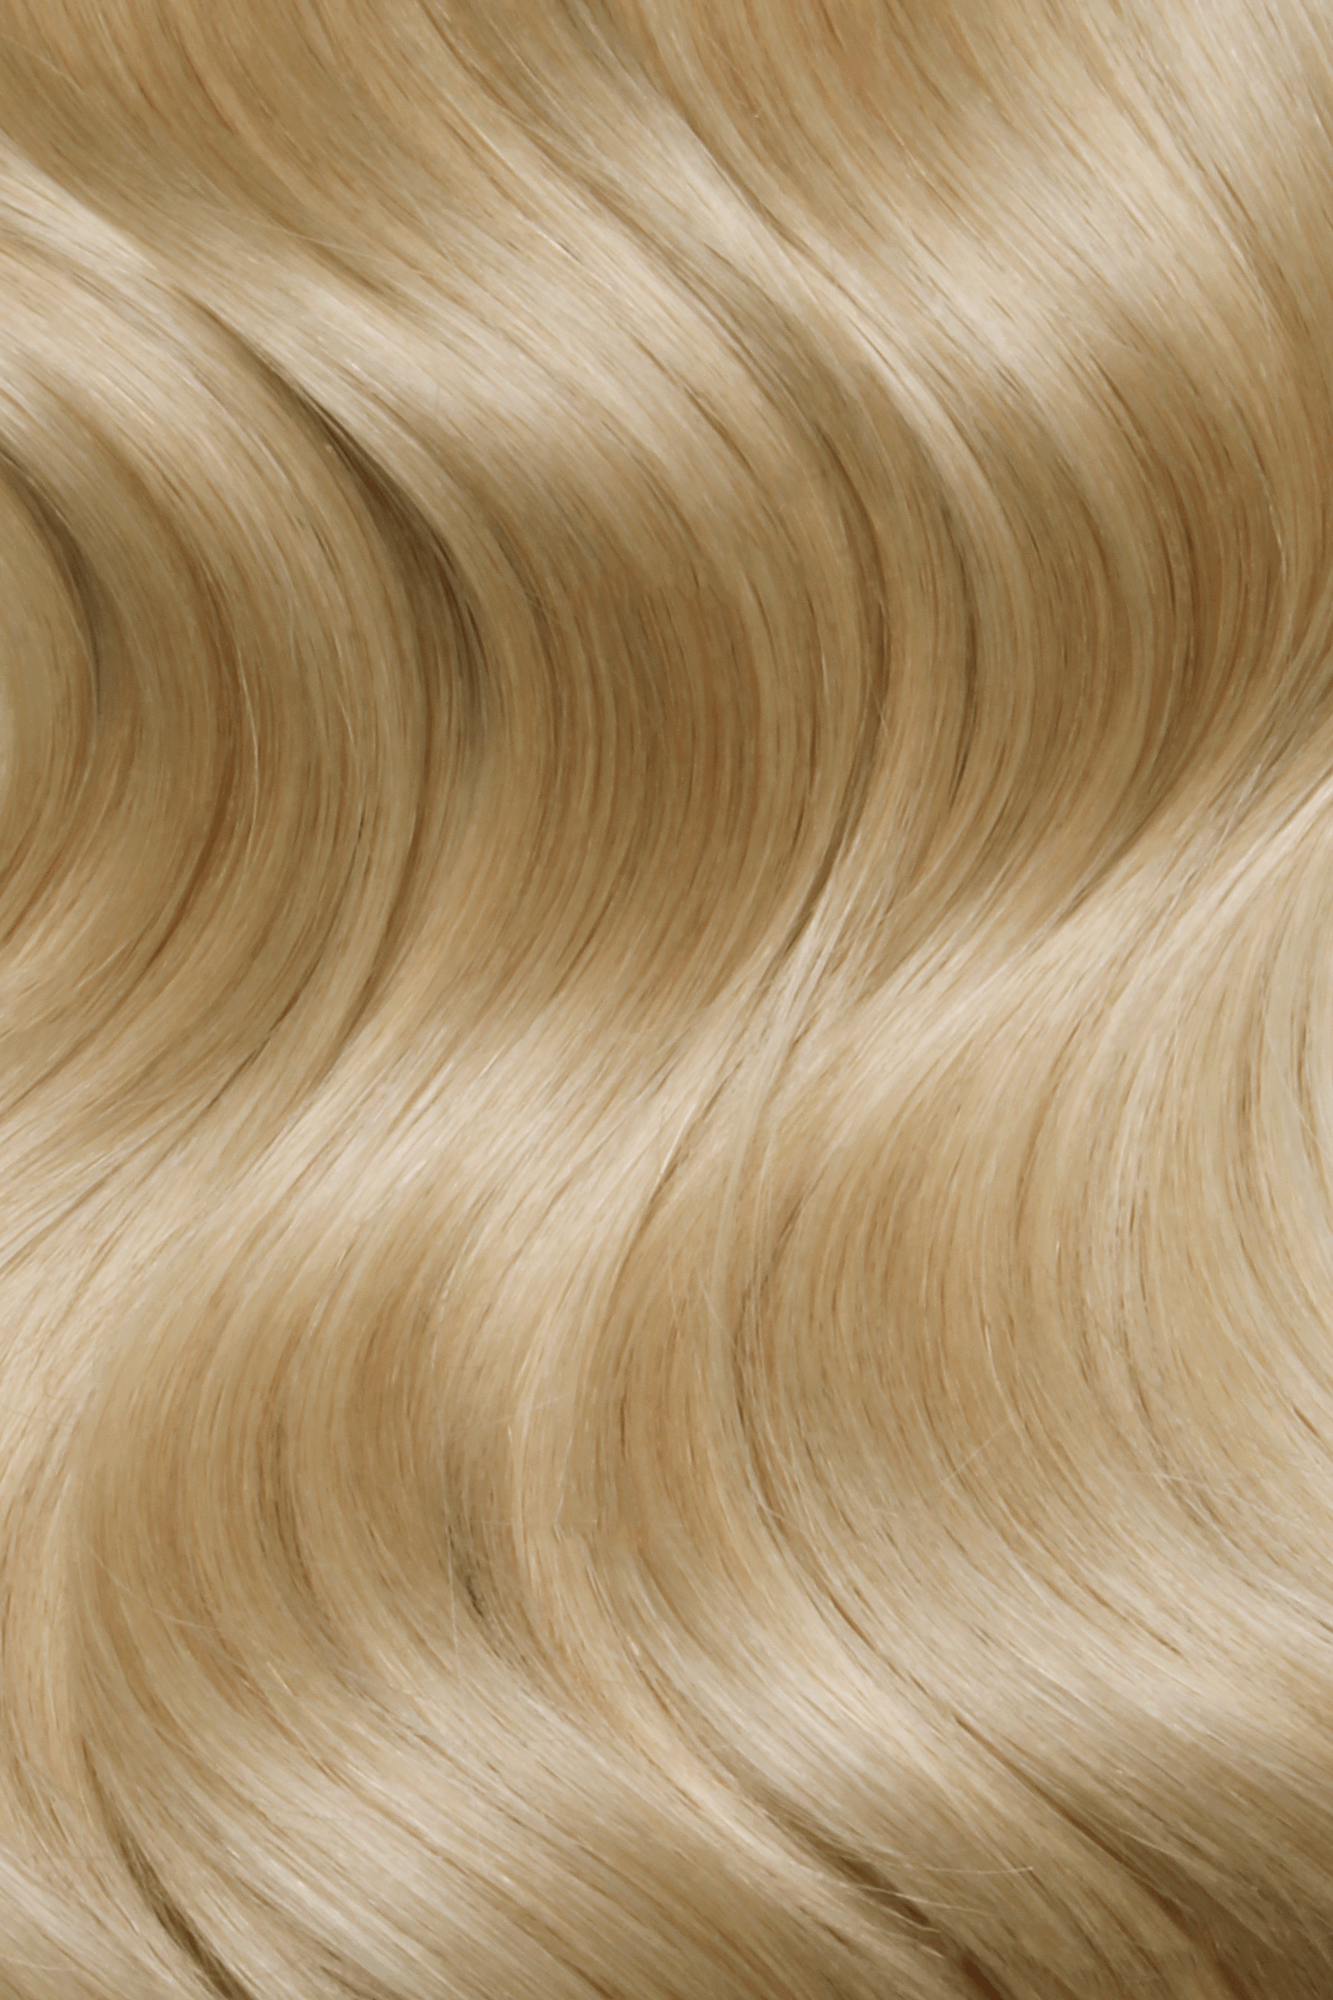 SEAMLESS® Tapes 24 Inches - SWAY Hair Extensions Natural-Ash-Blonde-20 SWAY SEAMLESS® Tapes 24 Inches - Natural, lightweight hair extensions for longer, fuller, and luxurious hair. Virtually undetectable, reusable, and perfect for any hairstyle